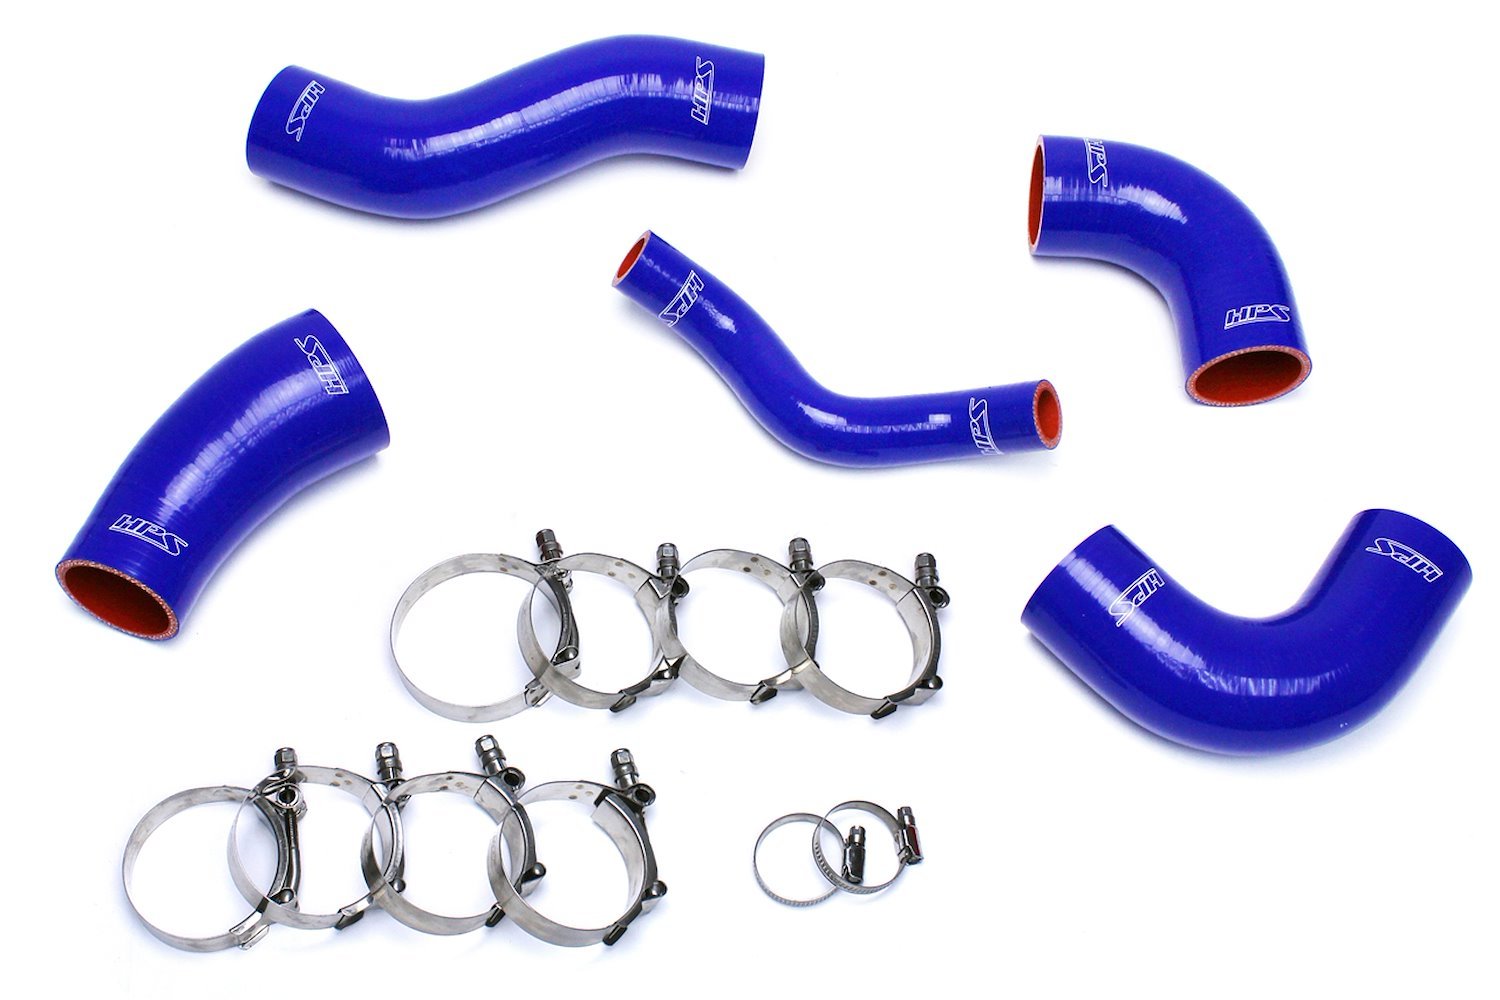 57-1420-BLUE Intercooler Hose Kit, High-Temp 4-Ply Reinforced Silicone, Replace OEM Rubber Intercooler Turbo Boots